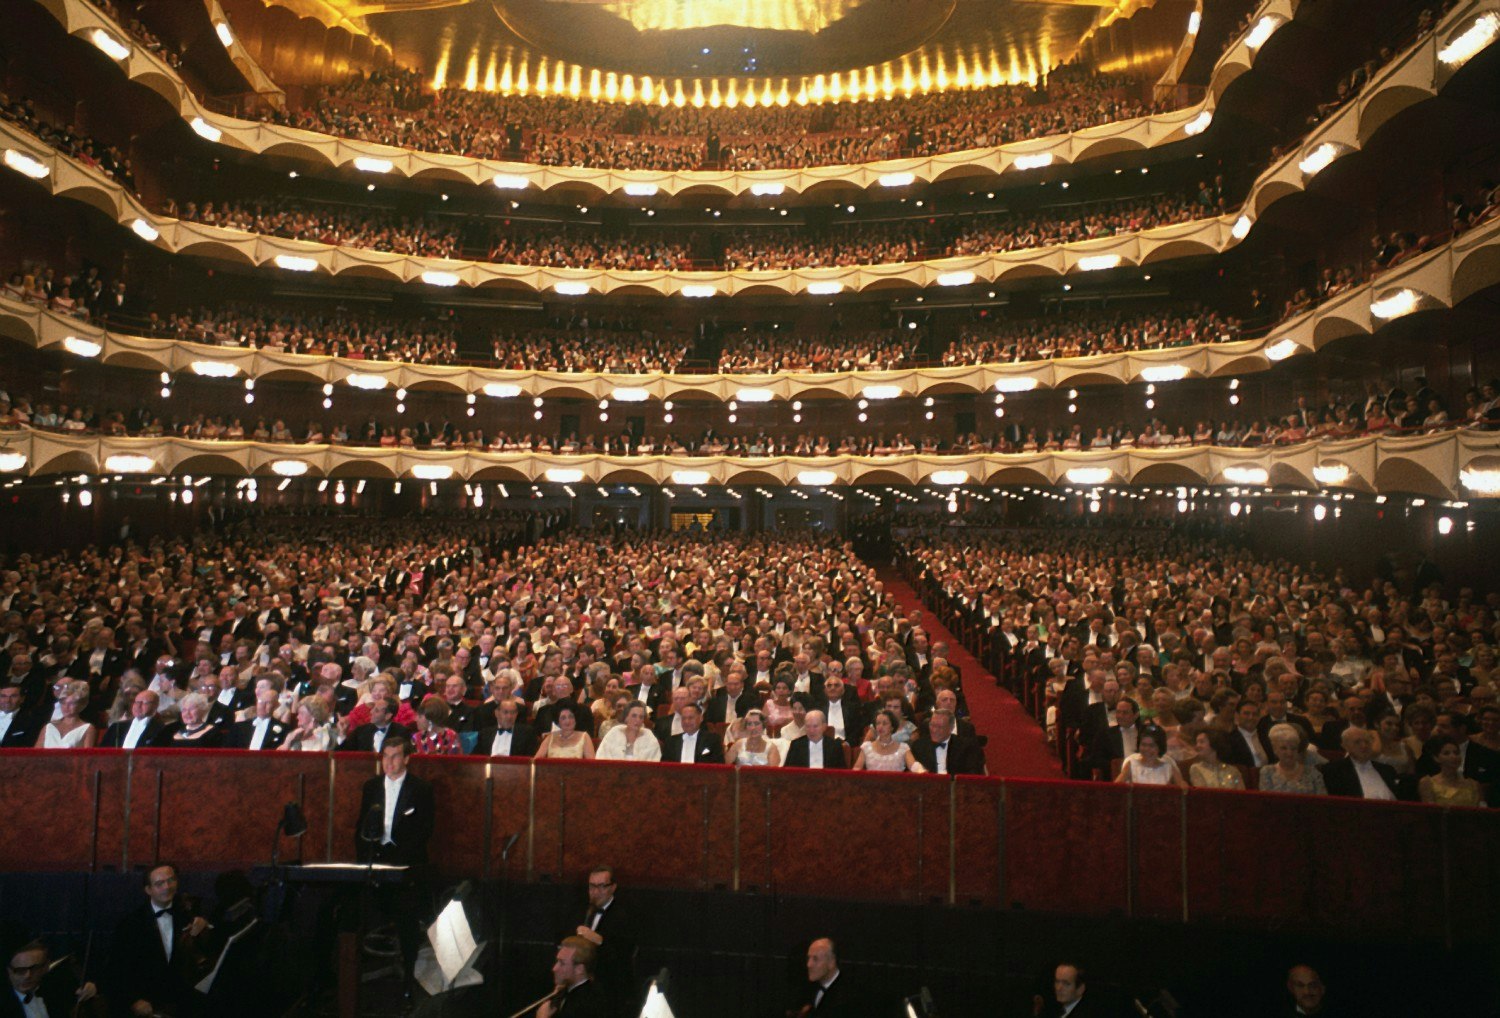 The audience at the Met Opera house in New York